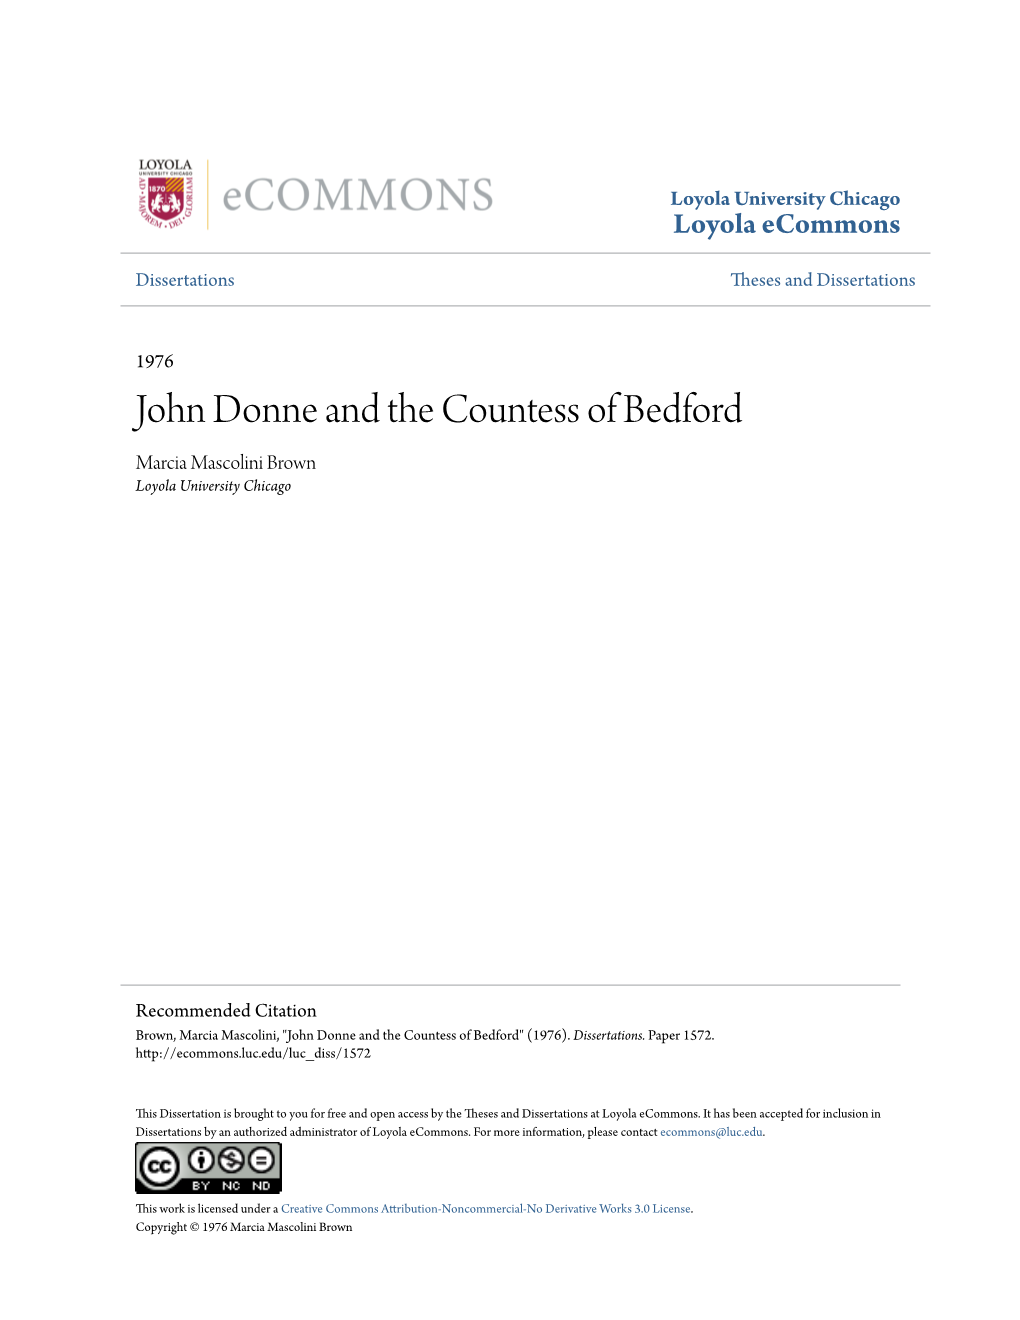 John Donne and the Countess of Bedford Marcia Mascolini Brown Loyola University Chicago